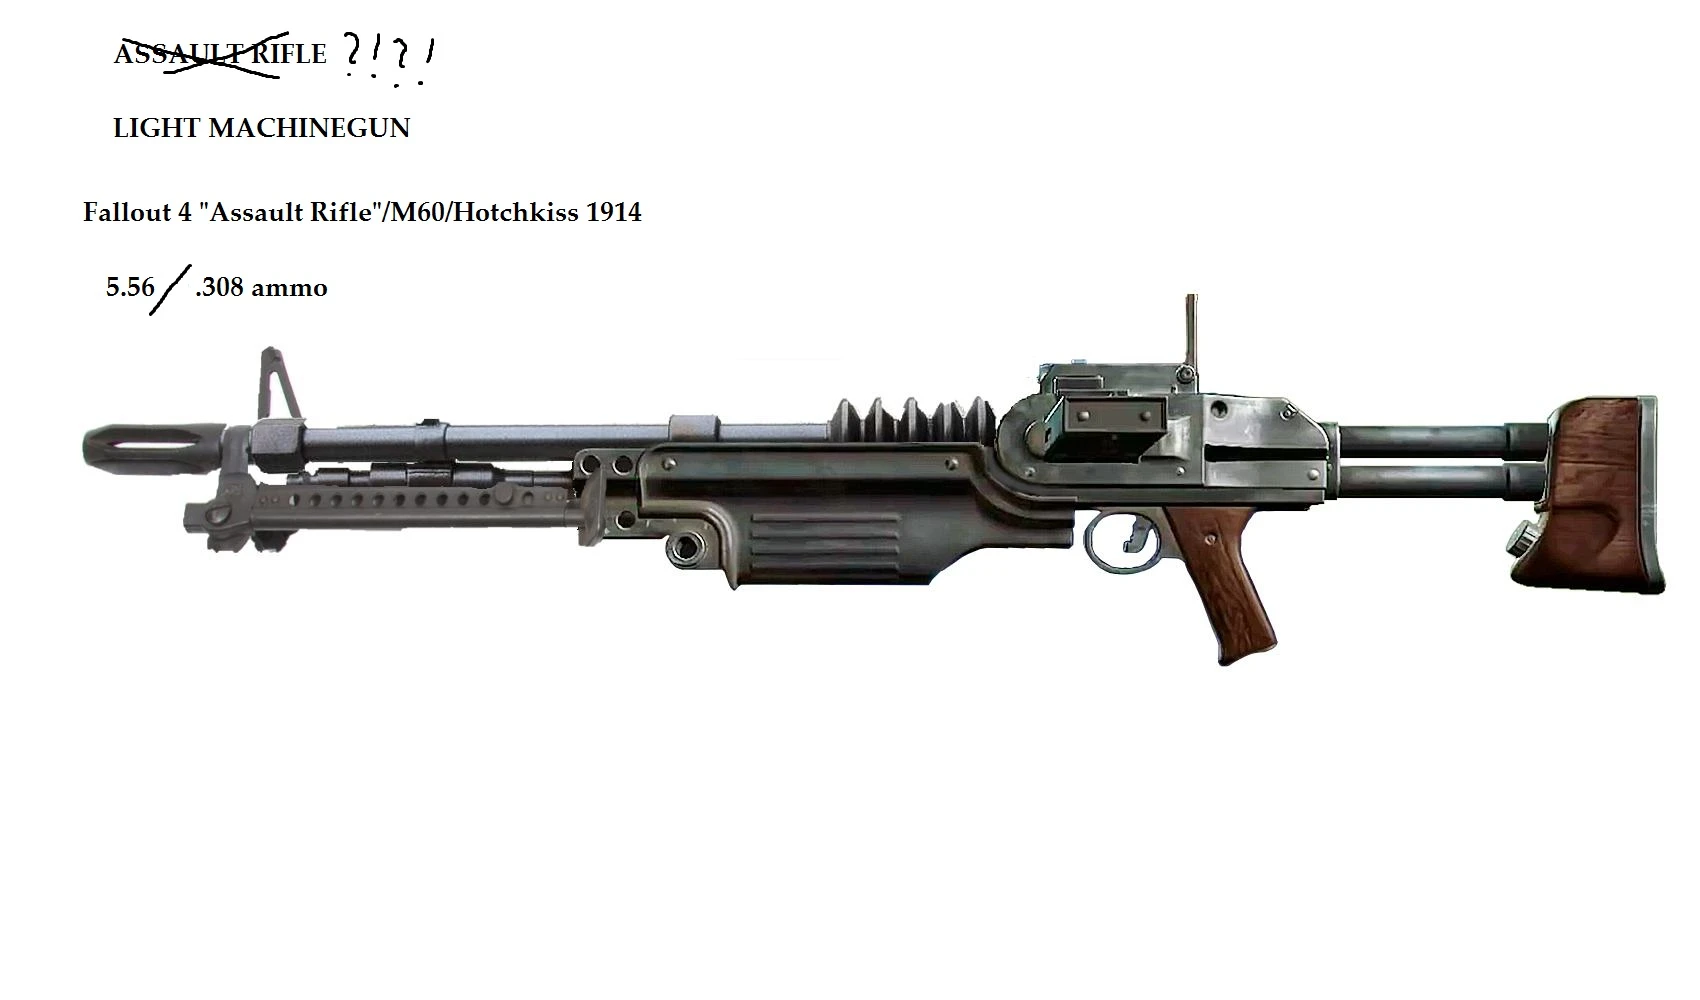 Fallout 4 assault rifle from fallout 3 фото 41